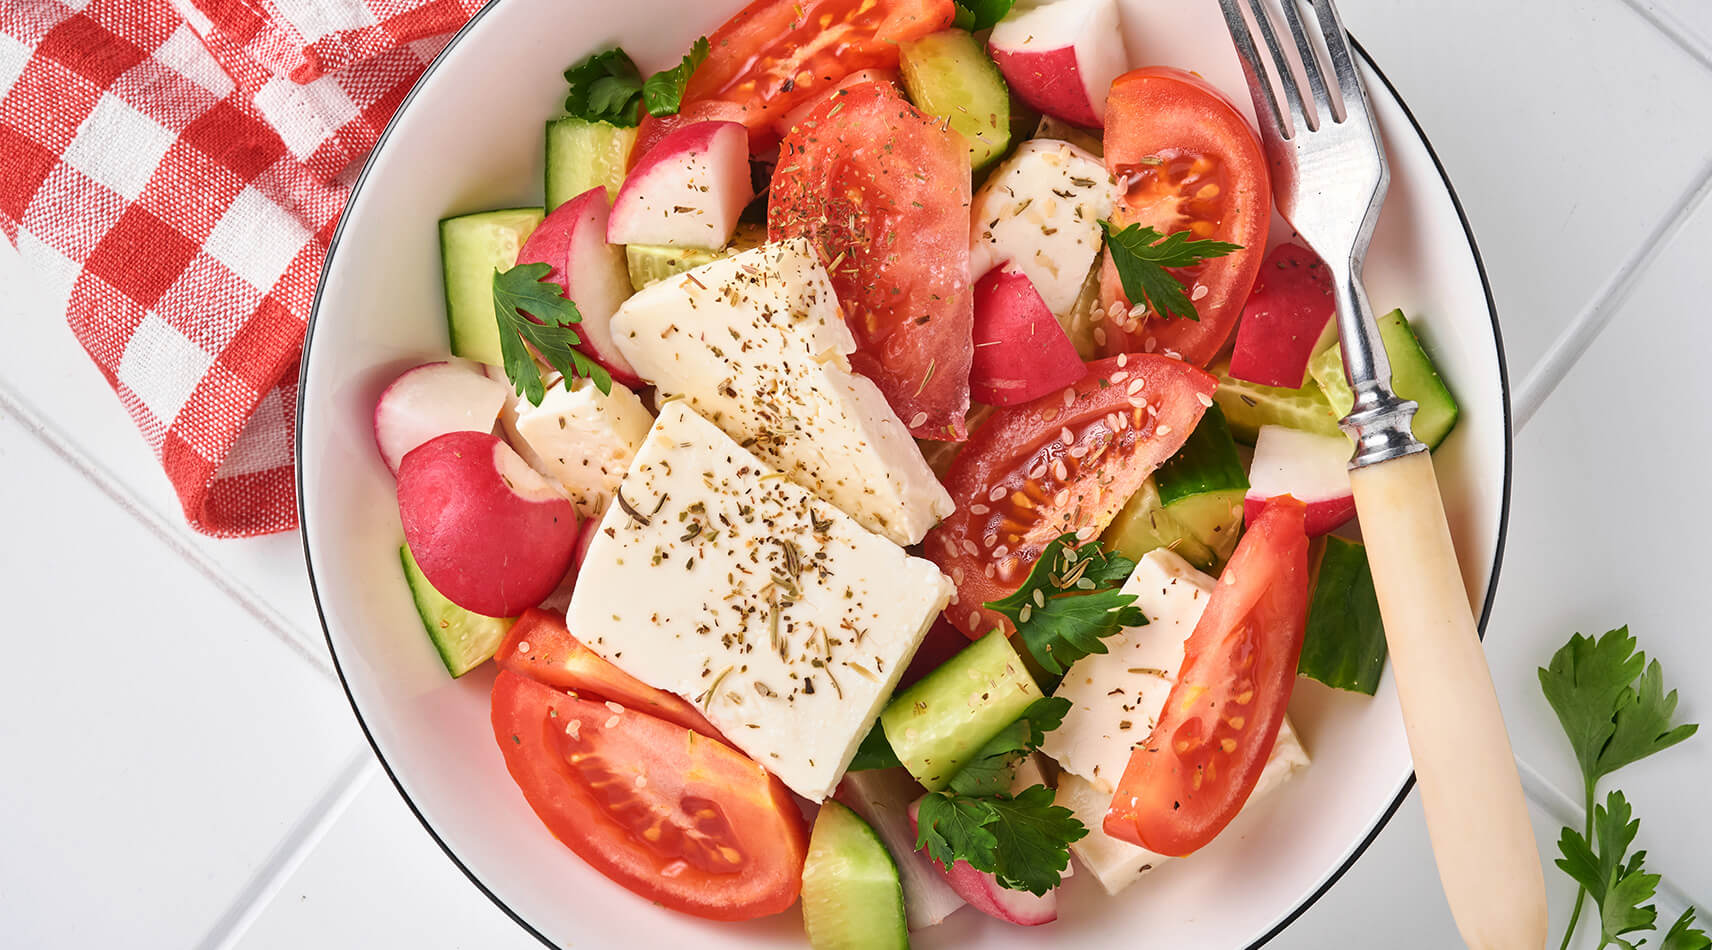 Prepare proper salad with high proteins